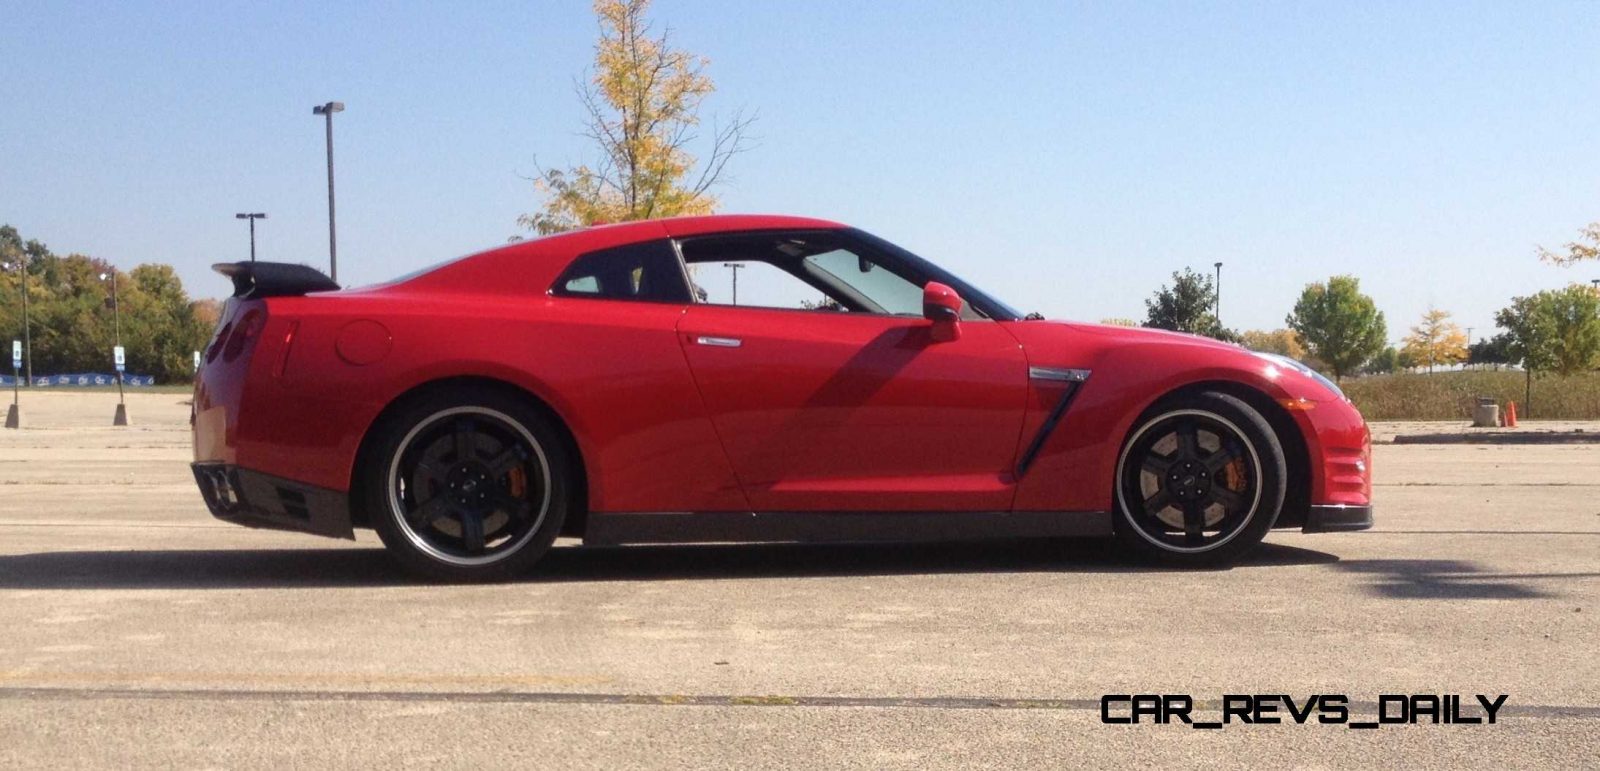 2013 Nissan gt r daily driver #5